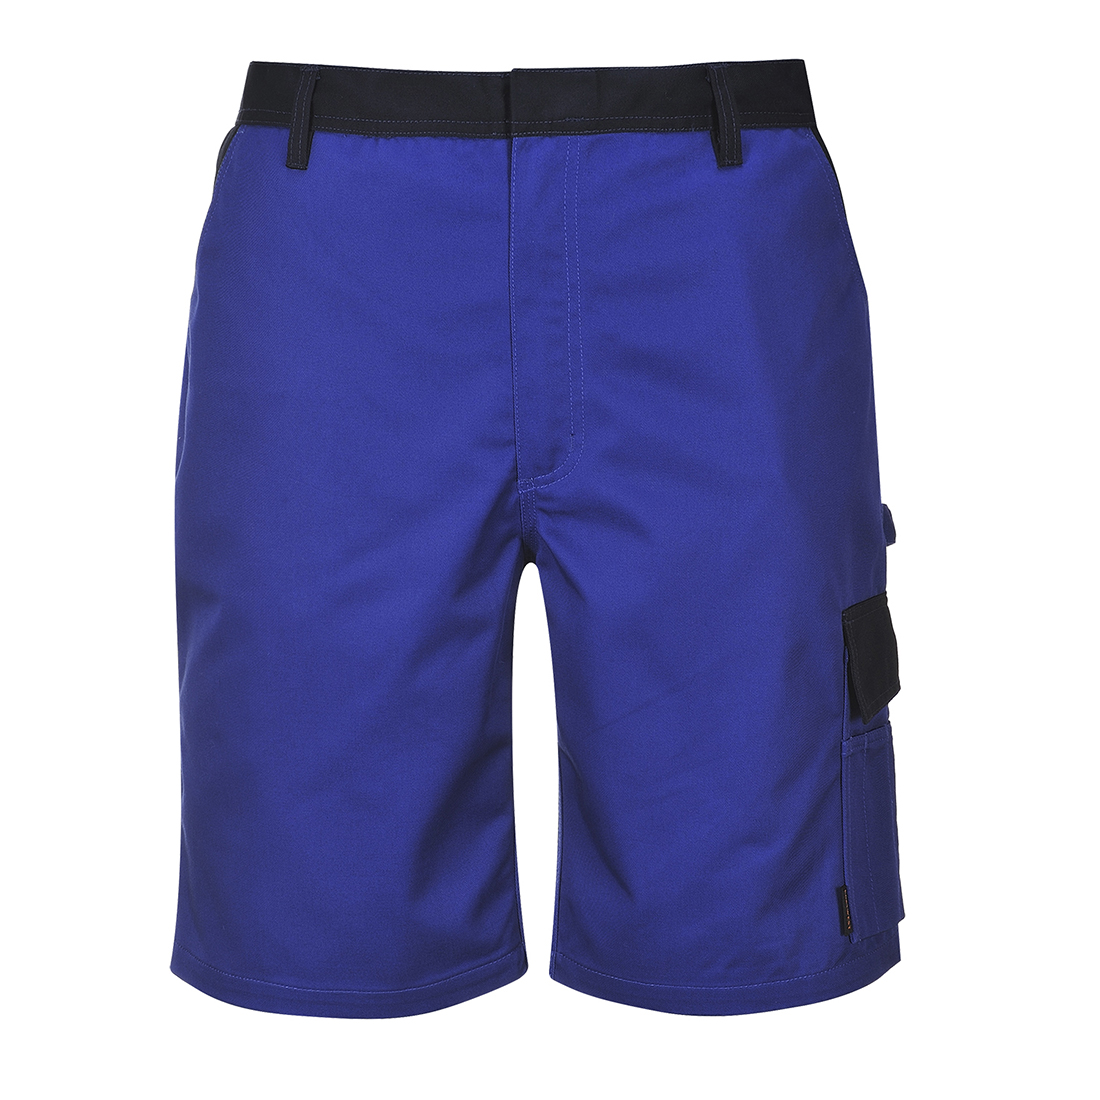 Strong Twill Fabric Winter Style Shorts